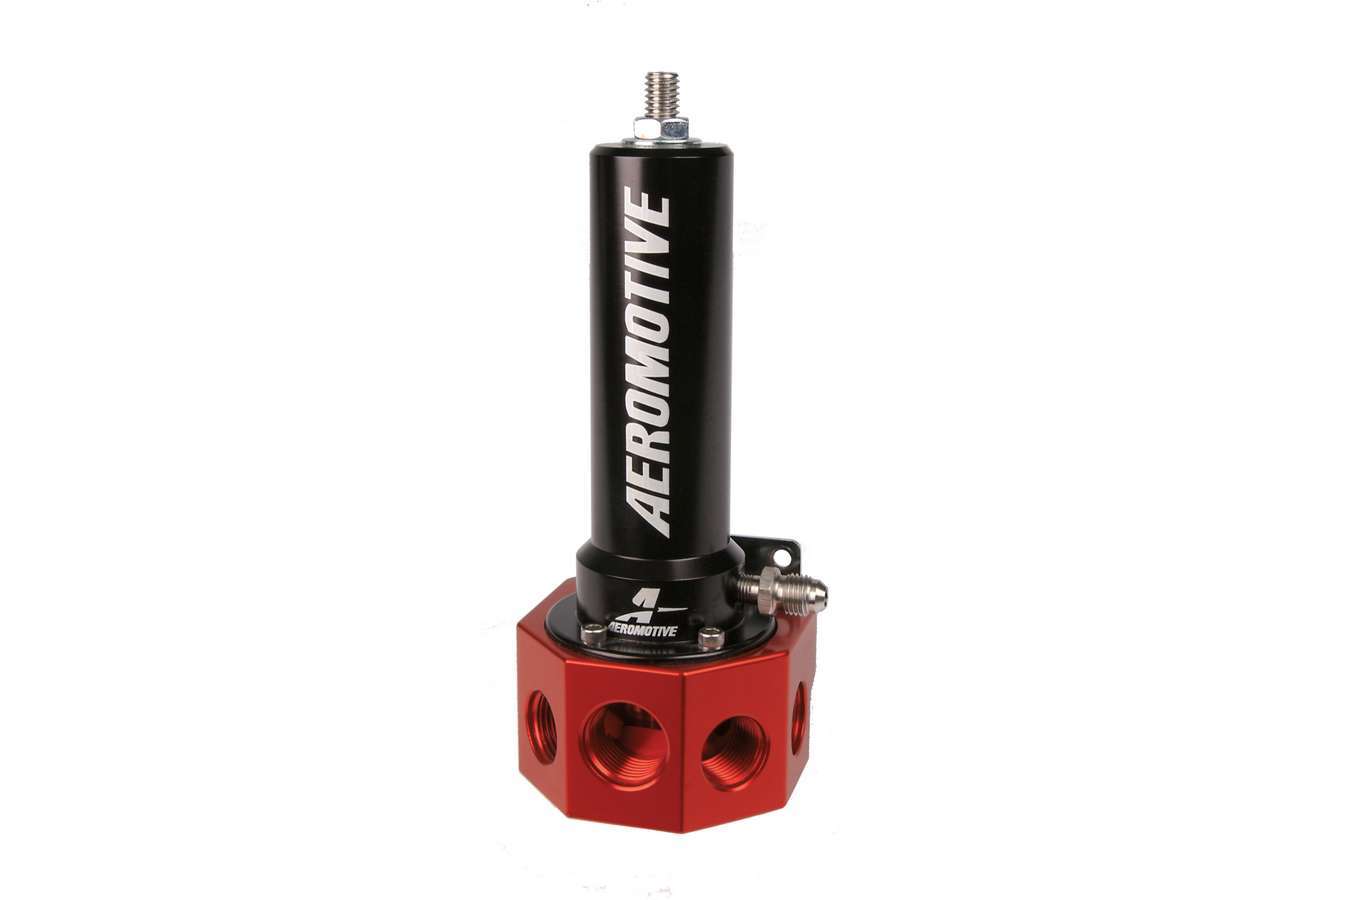 Aeromotive 13113 Fuel Pressure Regulator, Belt / Hex Drive EFI, 40 to 100 psi, In-Line, 8 AN / 10 AN Inlets, 10 AN Return, 1/8 in NPT Port, Black / Red Anodized, E85 / Gas / Diesel, Each